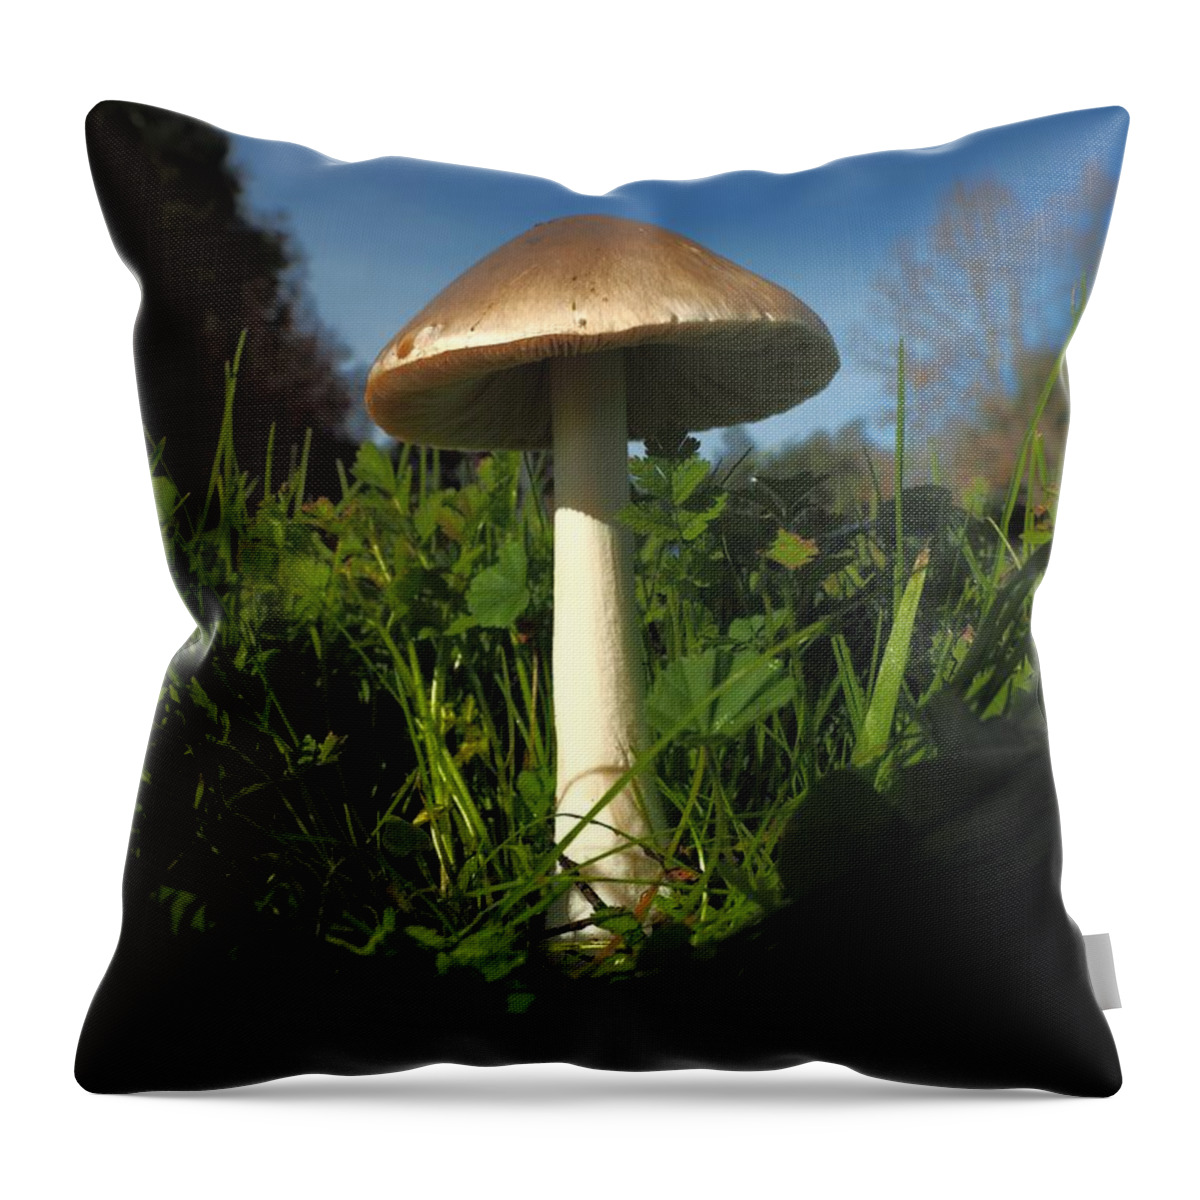 City Park Throw Pillow featuring the photograph Mushroom Direction by Richard Thomas